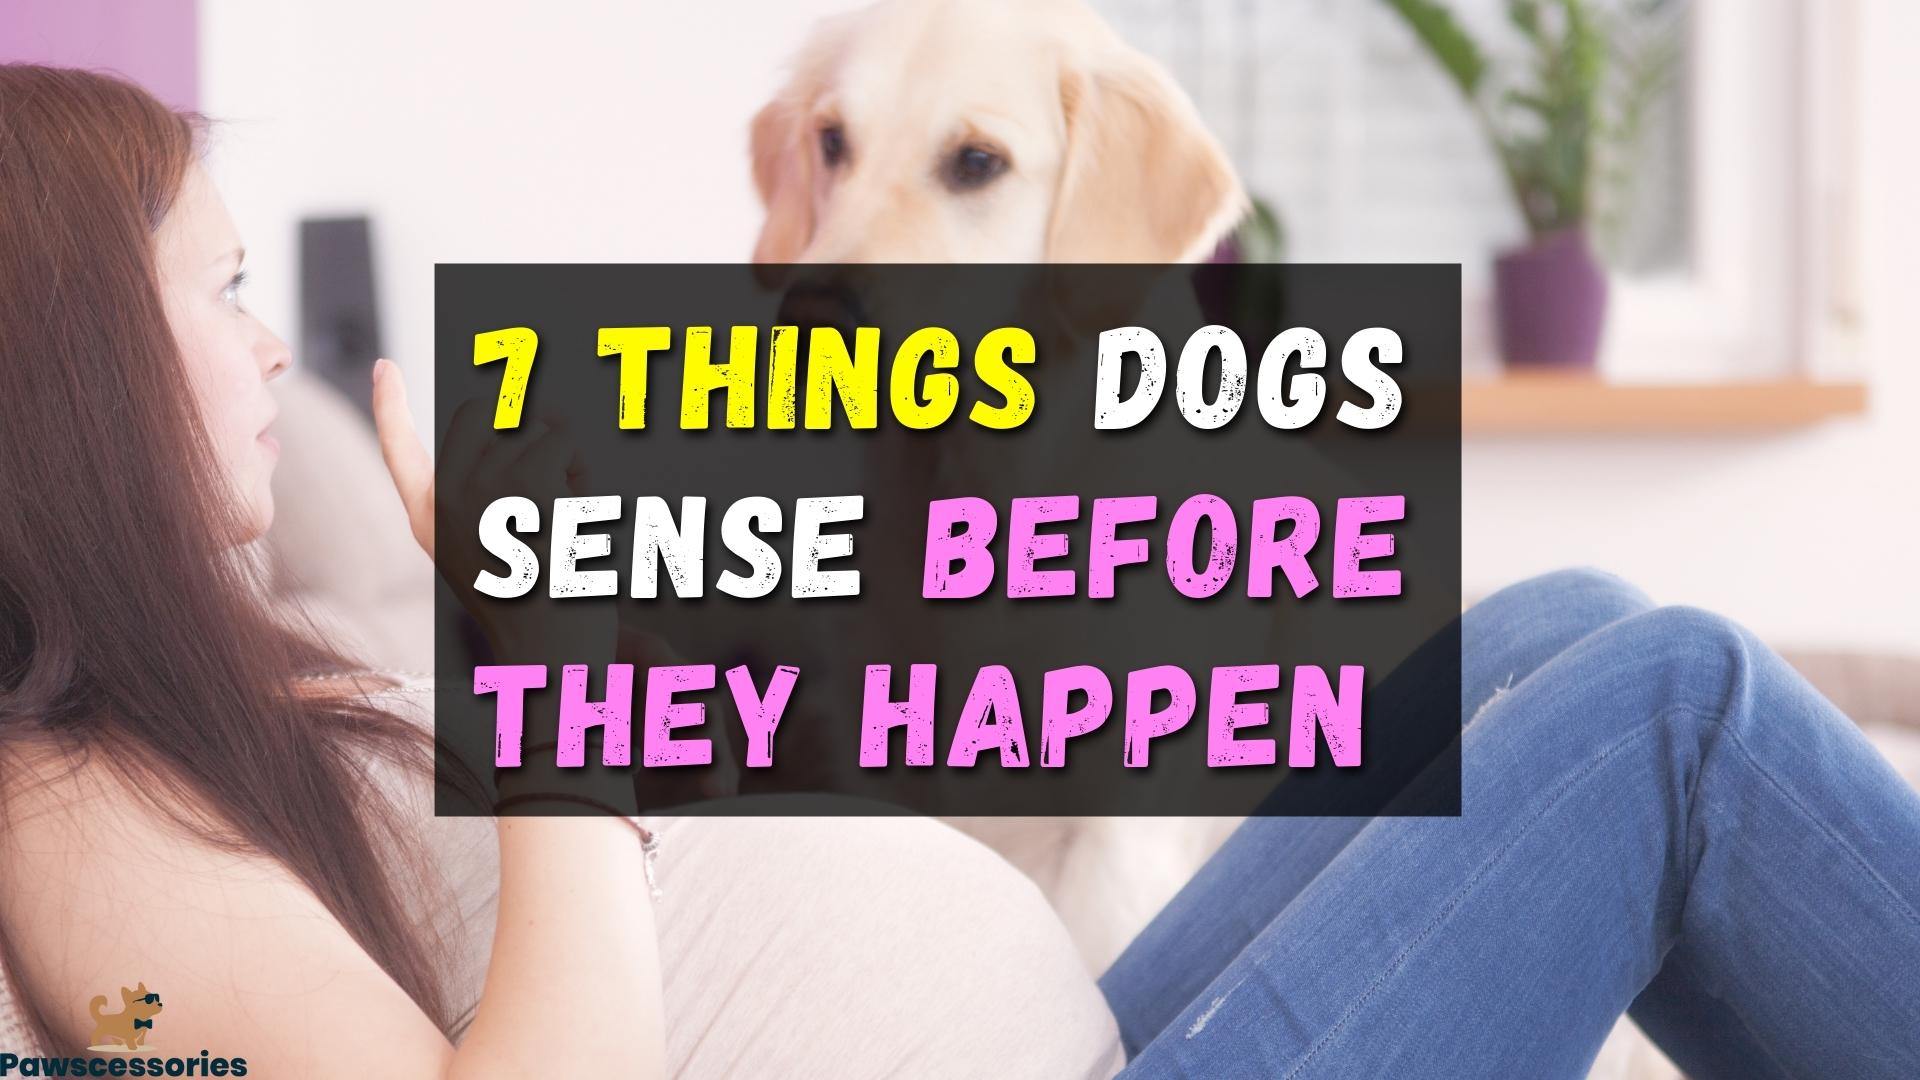 7 Unexplainable Things Dogs Sense Before They Happen